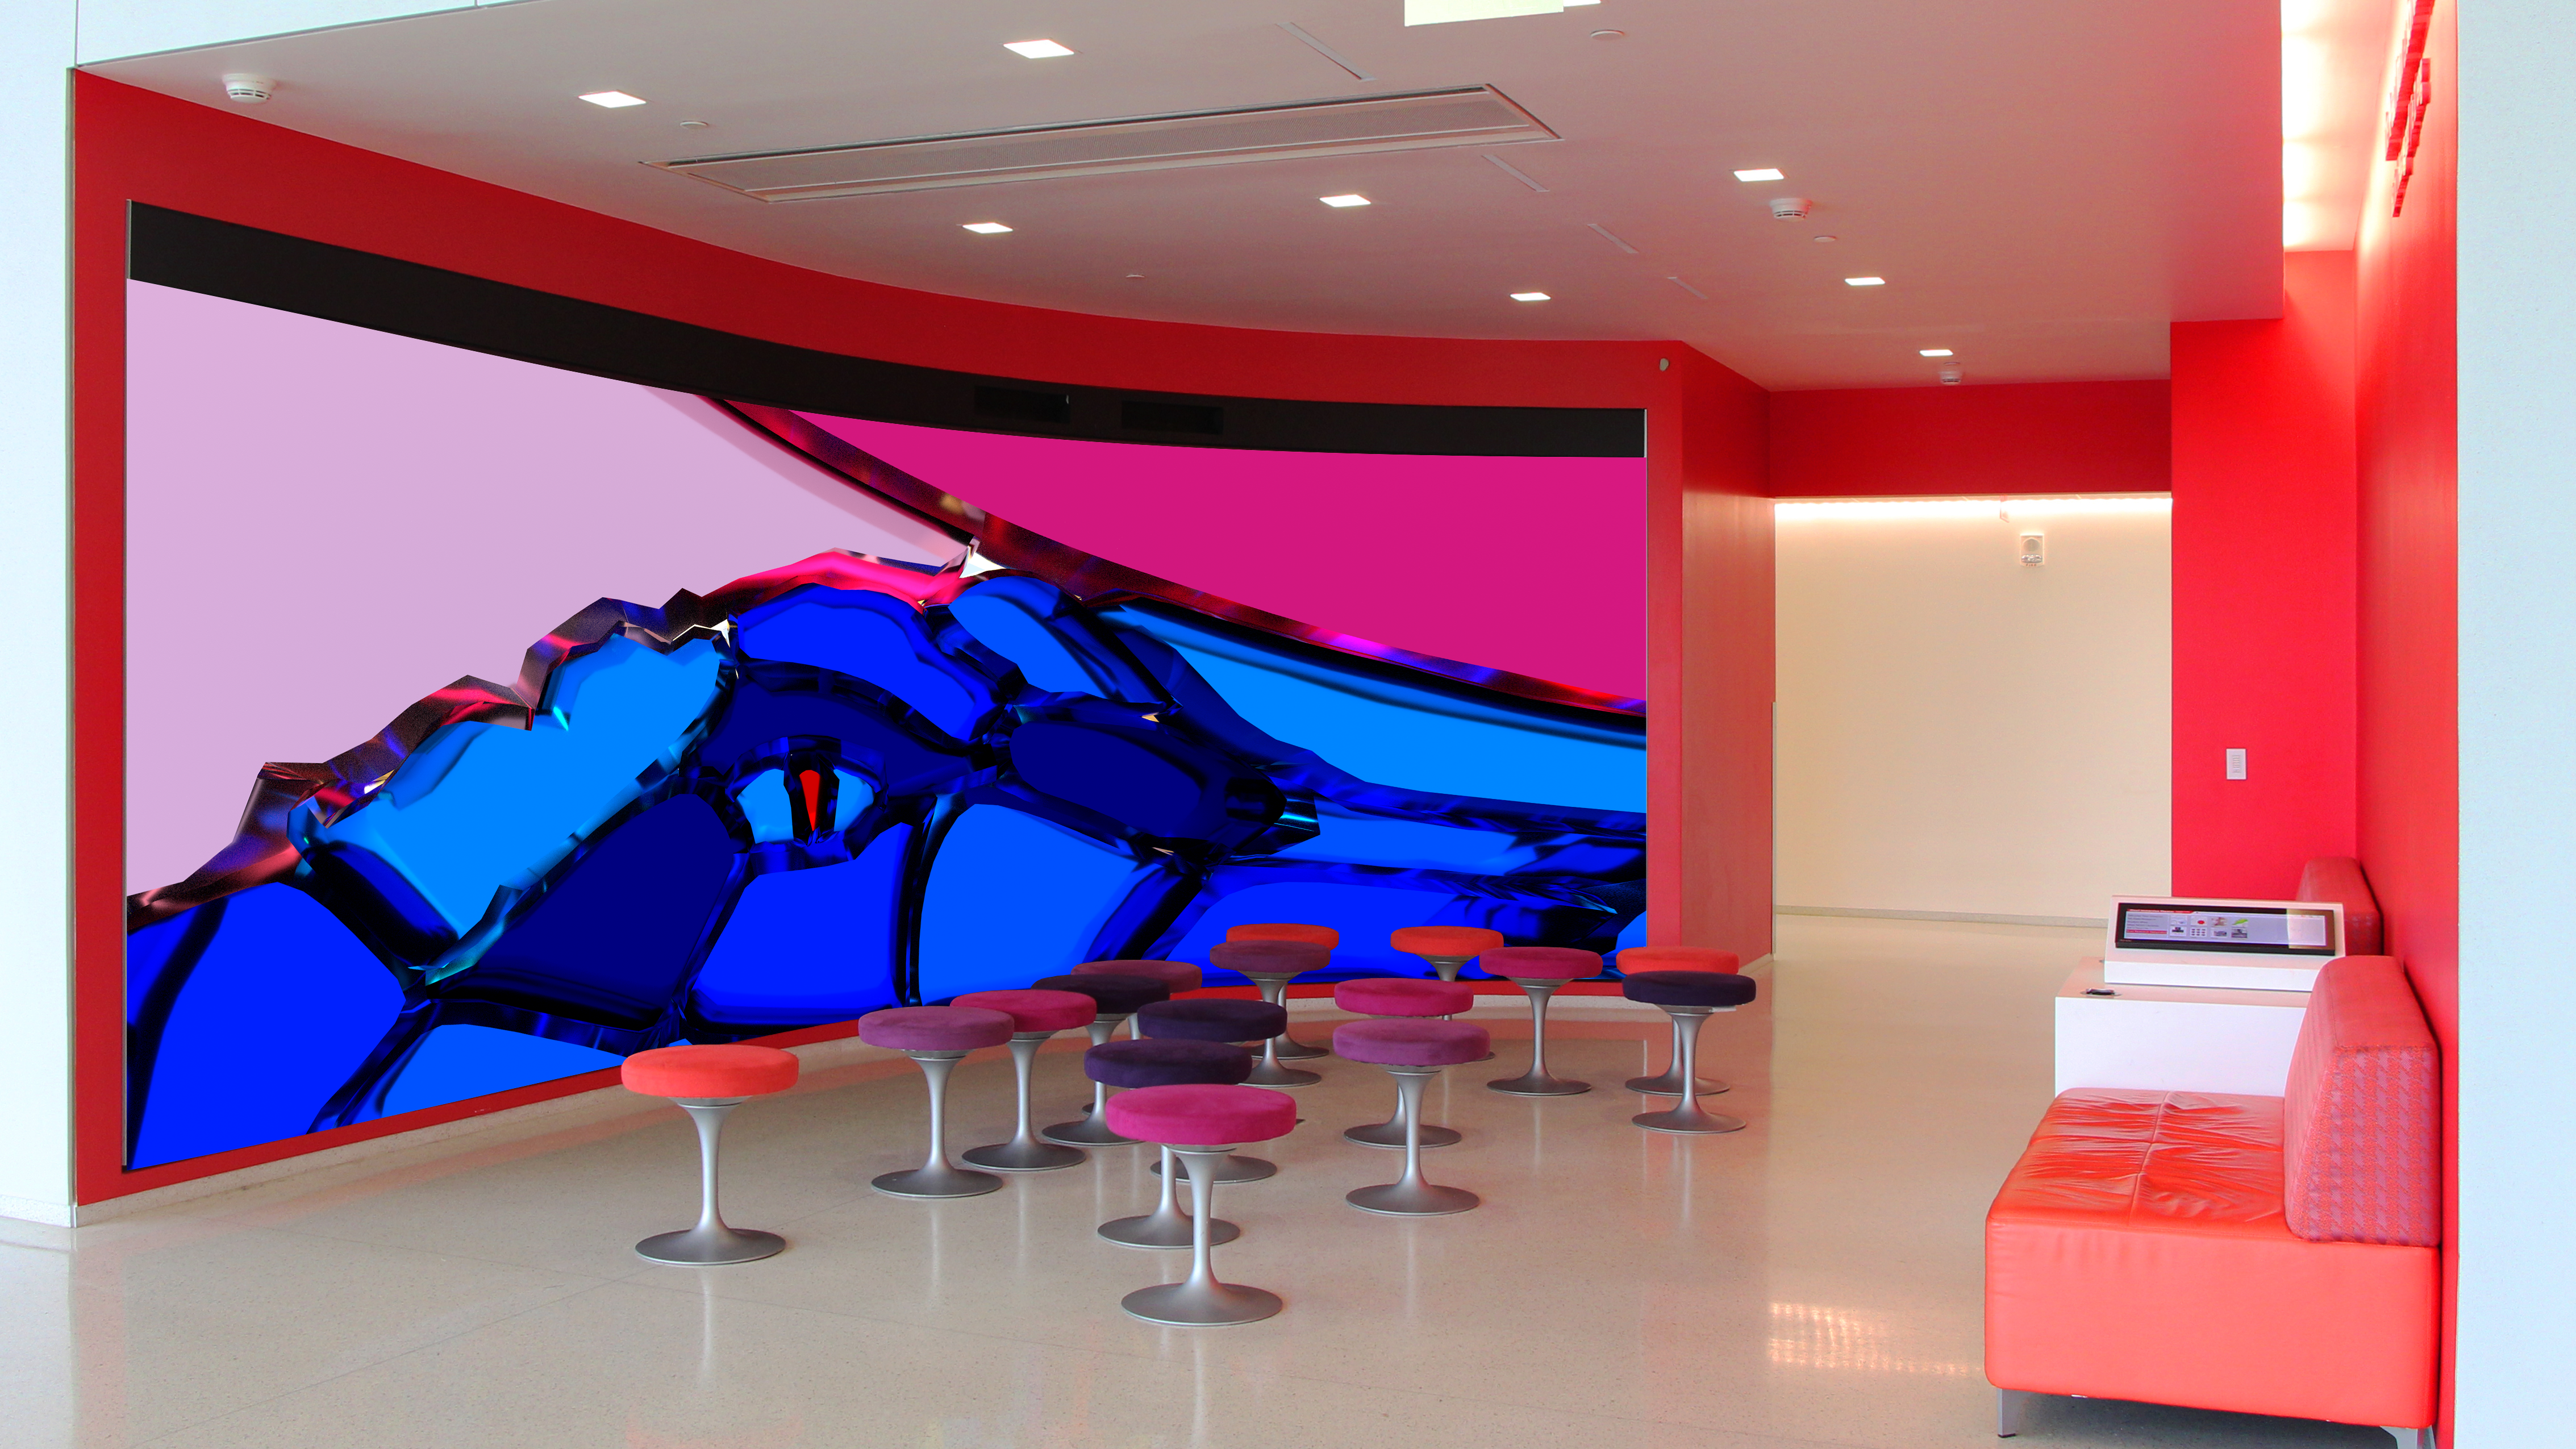 image viewer of Installation View 